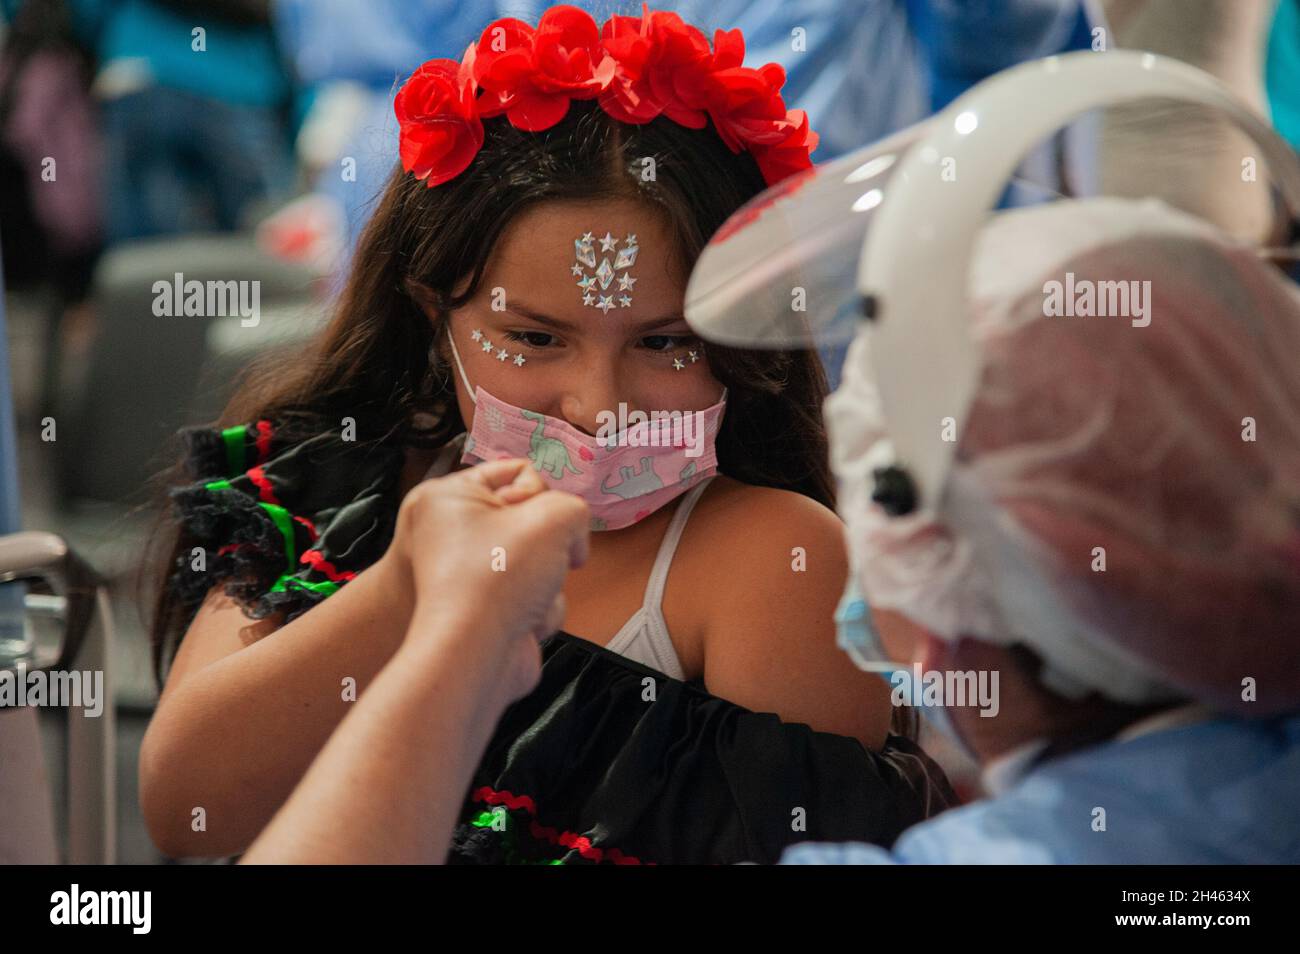 A girl dressed as a Mexican Catrina receives her first dose of the COVID-19 Vaccine as the Colombian government begins to vaccinate children between ages 3 to 11 against the Coronavirus disease (COVID-19) with the China's SINOVAC vaccine, in Bogota, Colombia on October 31, 2021. Stock Photo